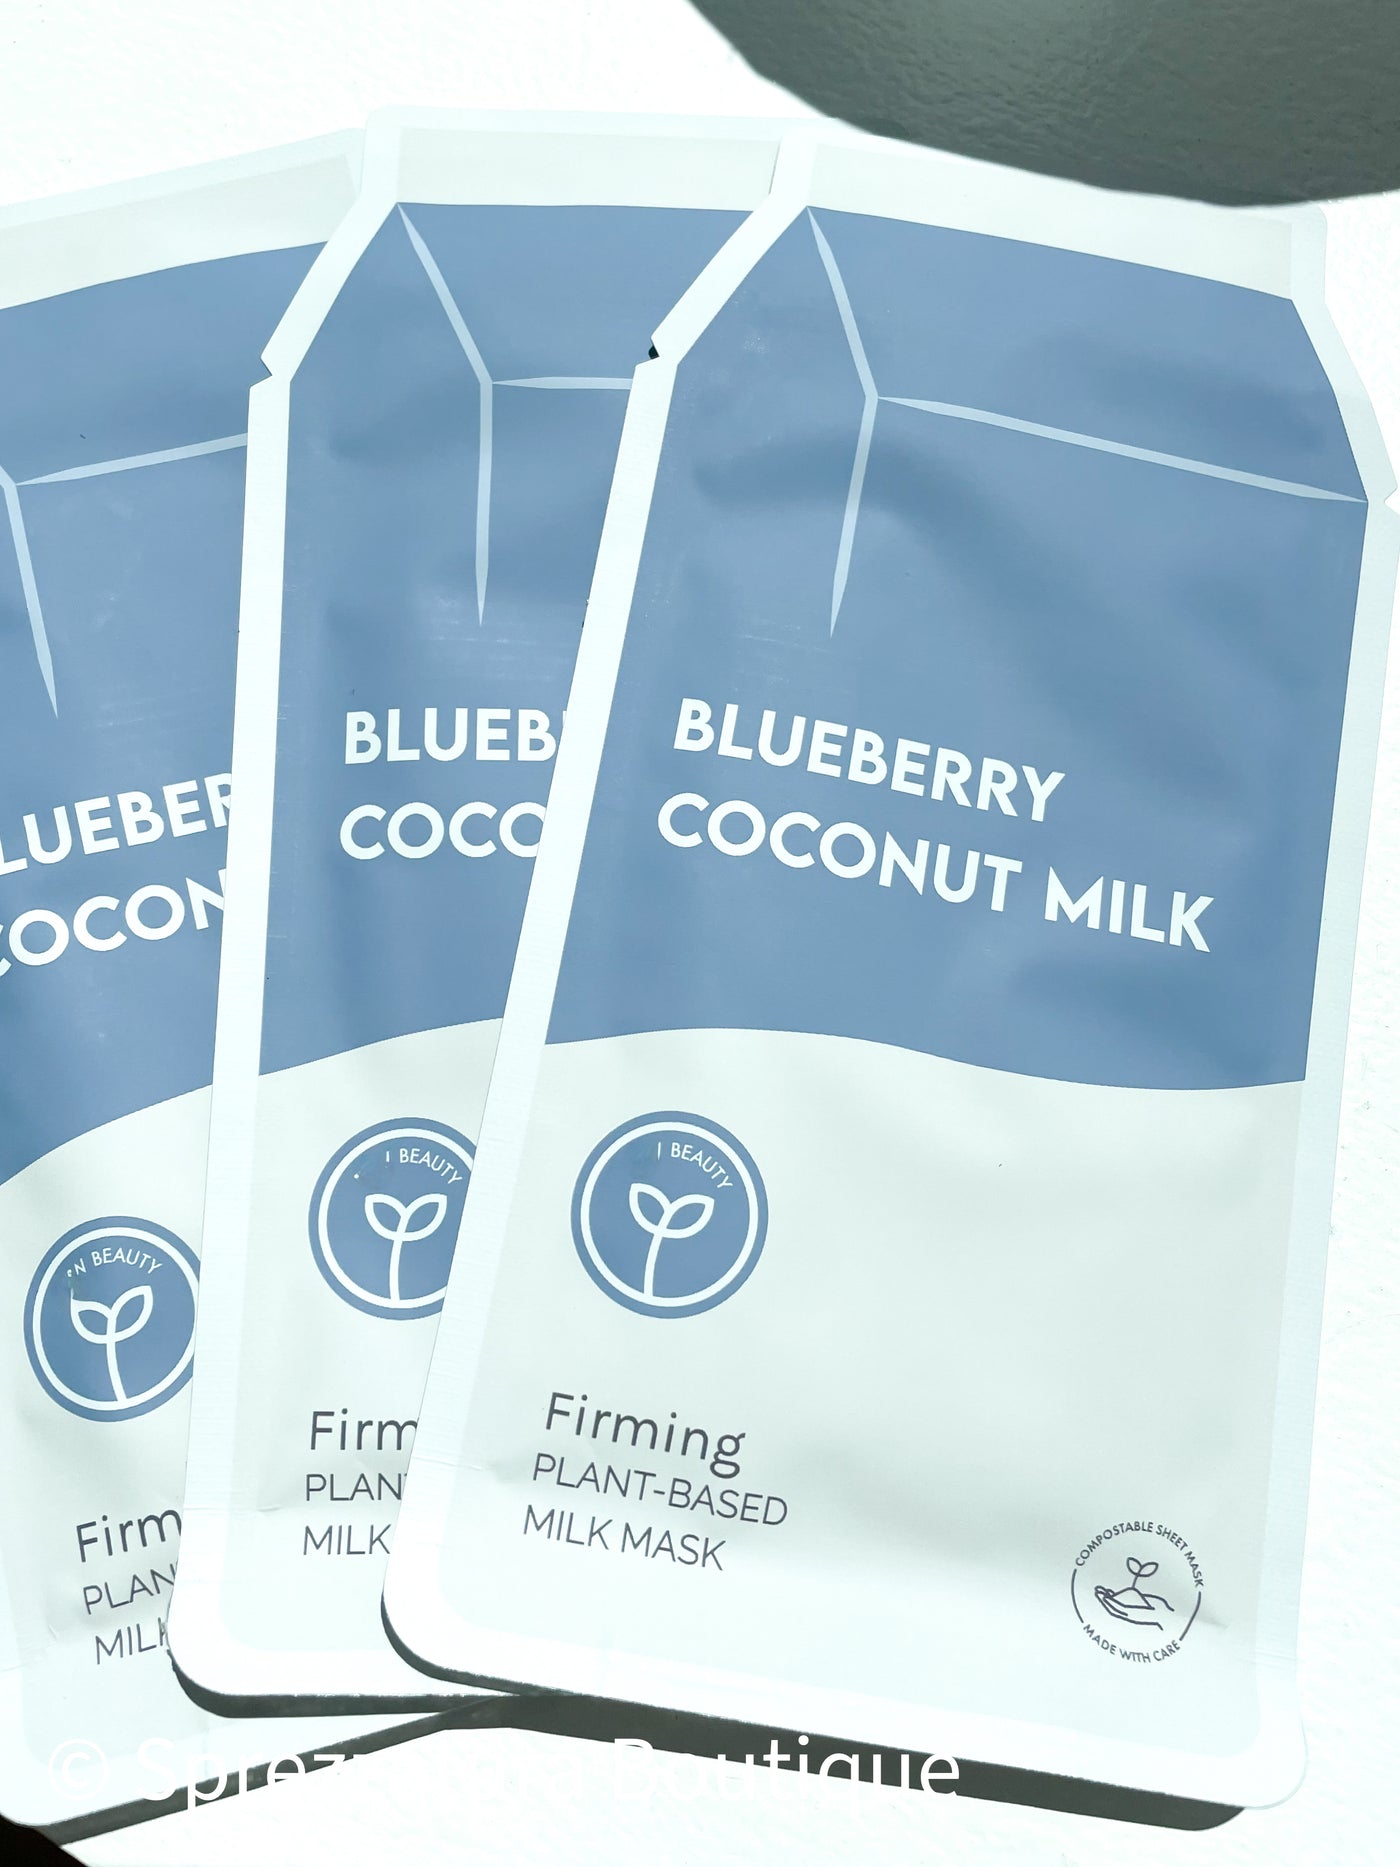 Vegan blueberry coconut milk firming sheet mask treat yourself gift for her plant-based face mask. Modern smart causal female chic effortless outfit womens ladies gift elegant effortless clothing clothes apparel outfits chic summer style women’s boutique trendy cute outfit midsize curvy sizes